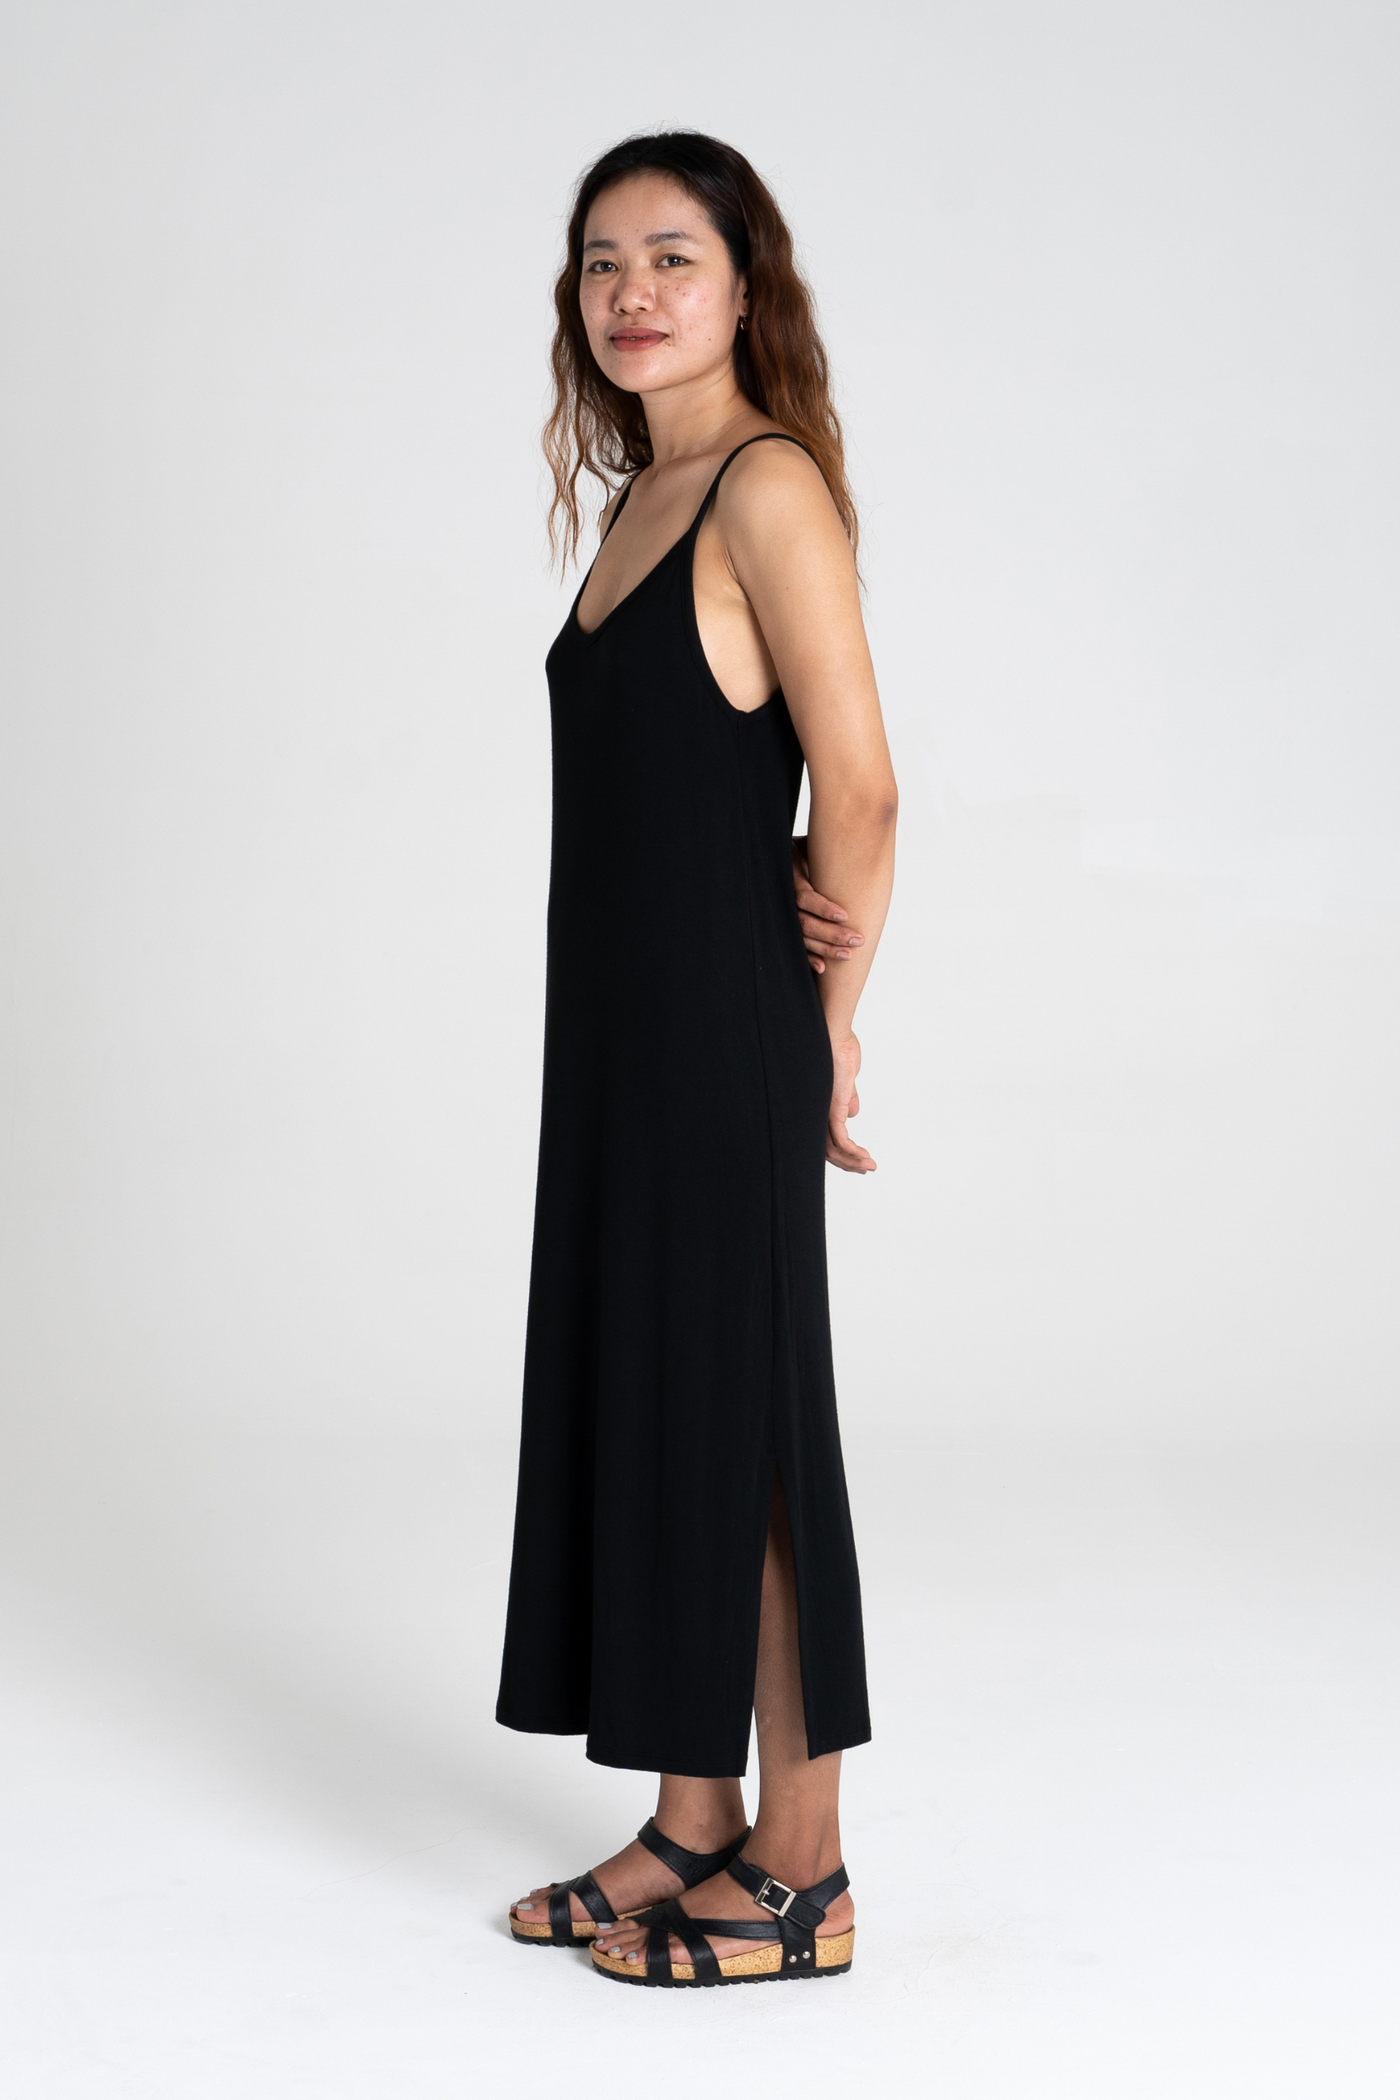 Singlet Dress in Black by Dorsu, available at ZERRIN with free Singapore shipping